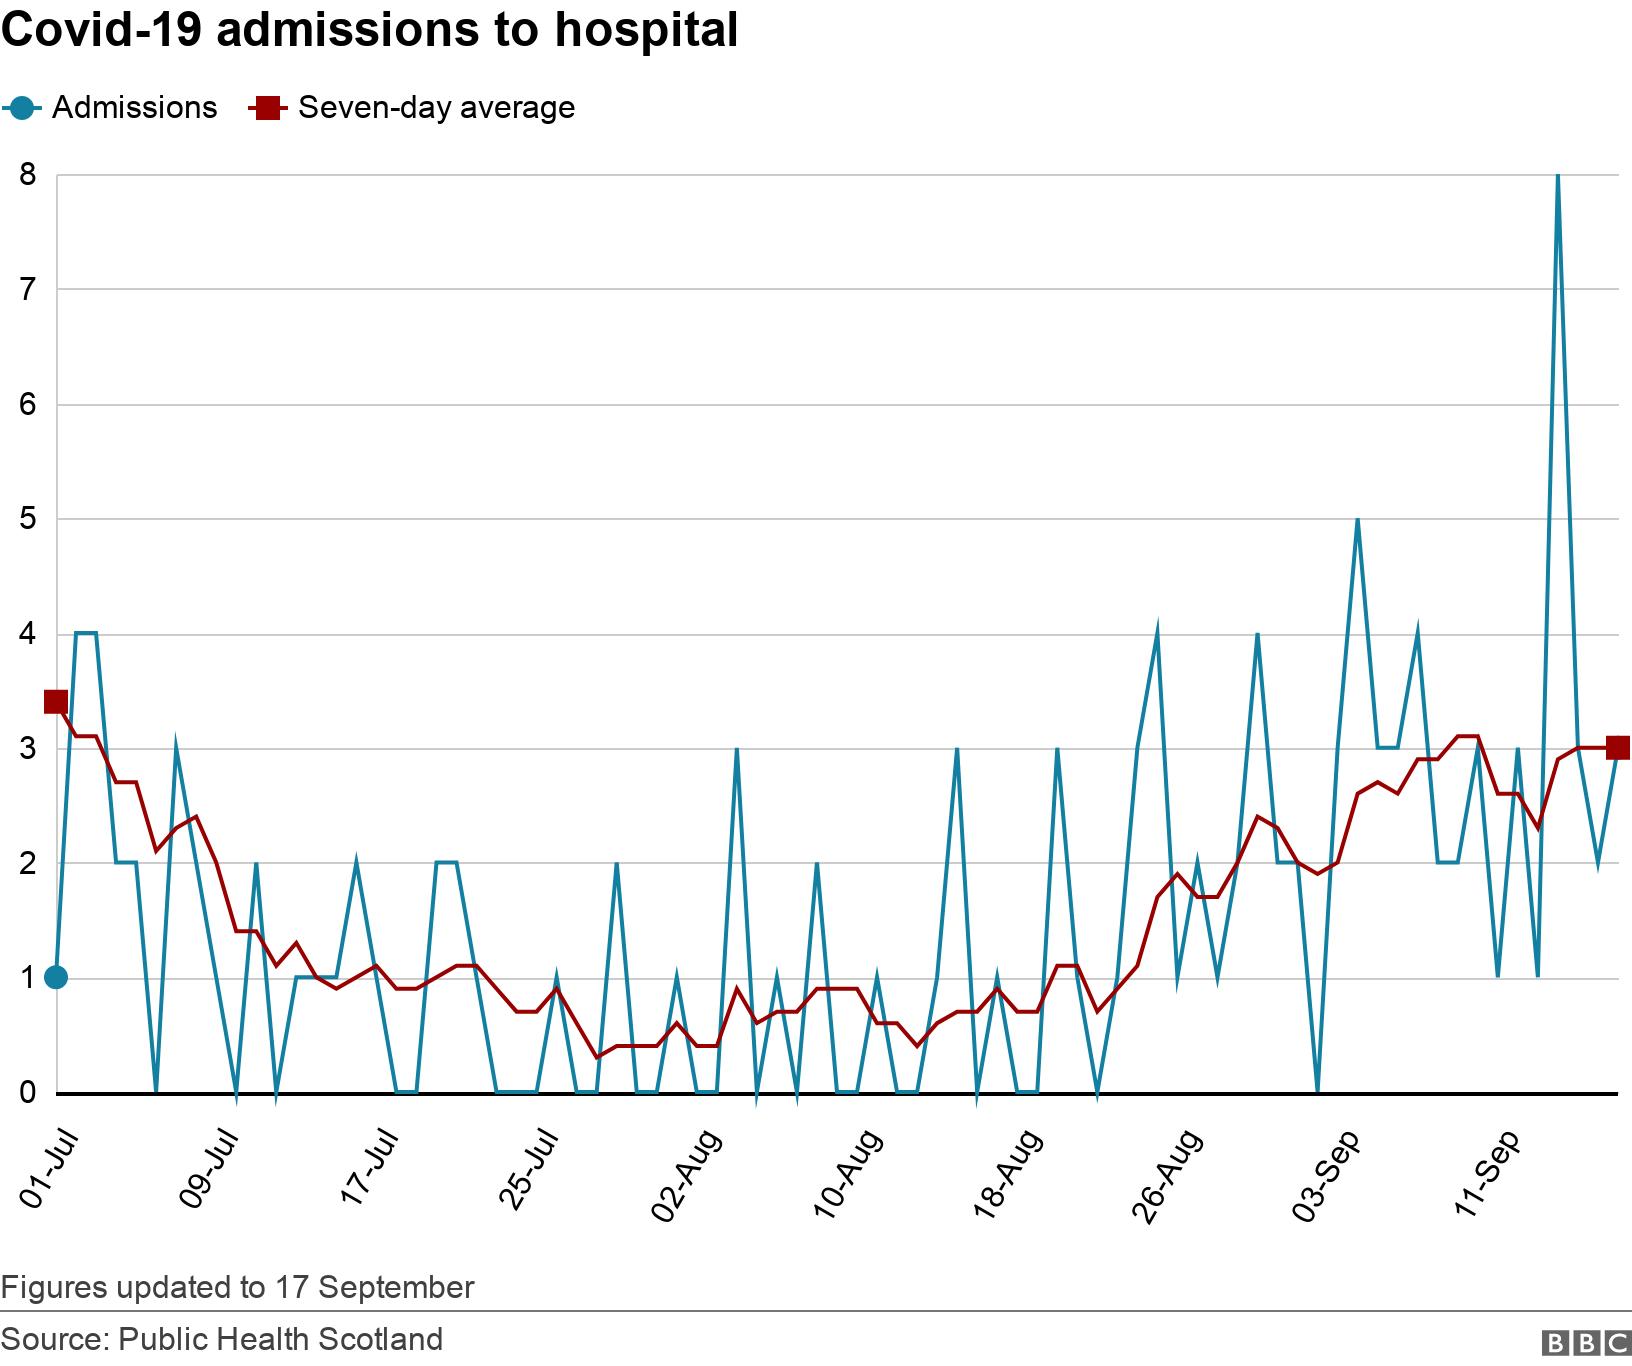 Covid-19 admissions to hospital. .  Figures updated to 17 September.